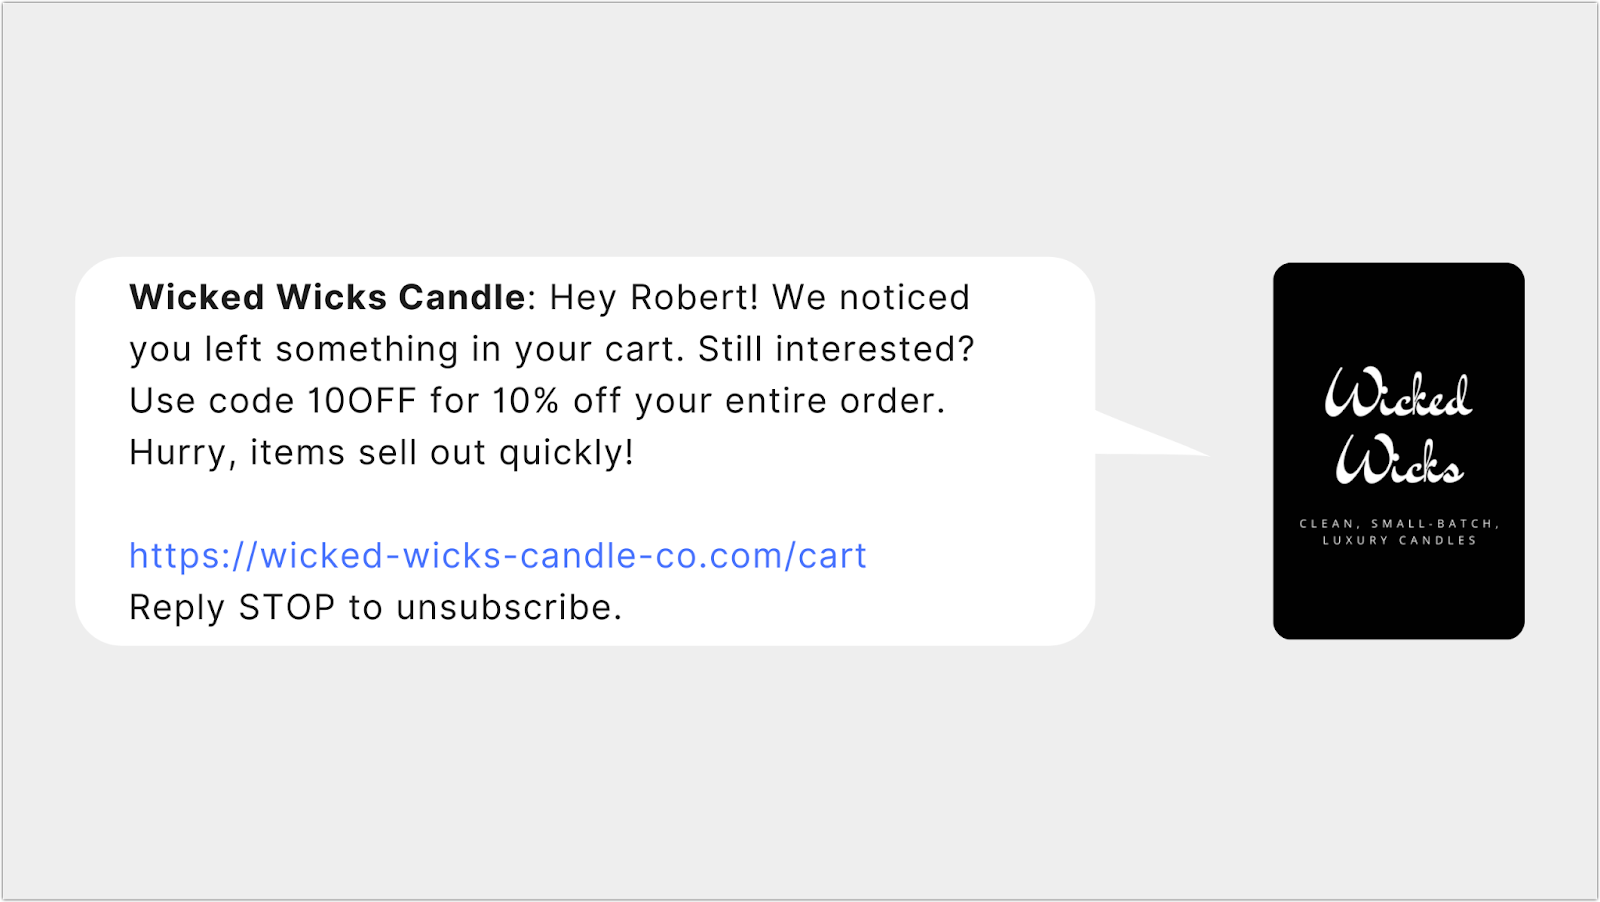 Wicked Wicks Candle abandoned cart text example